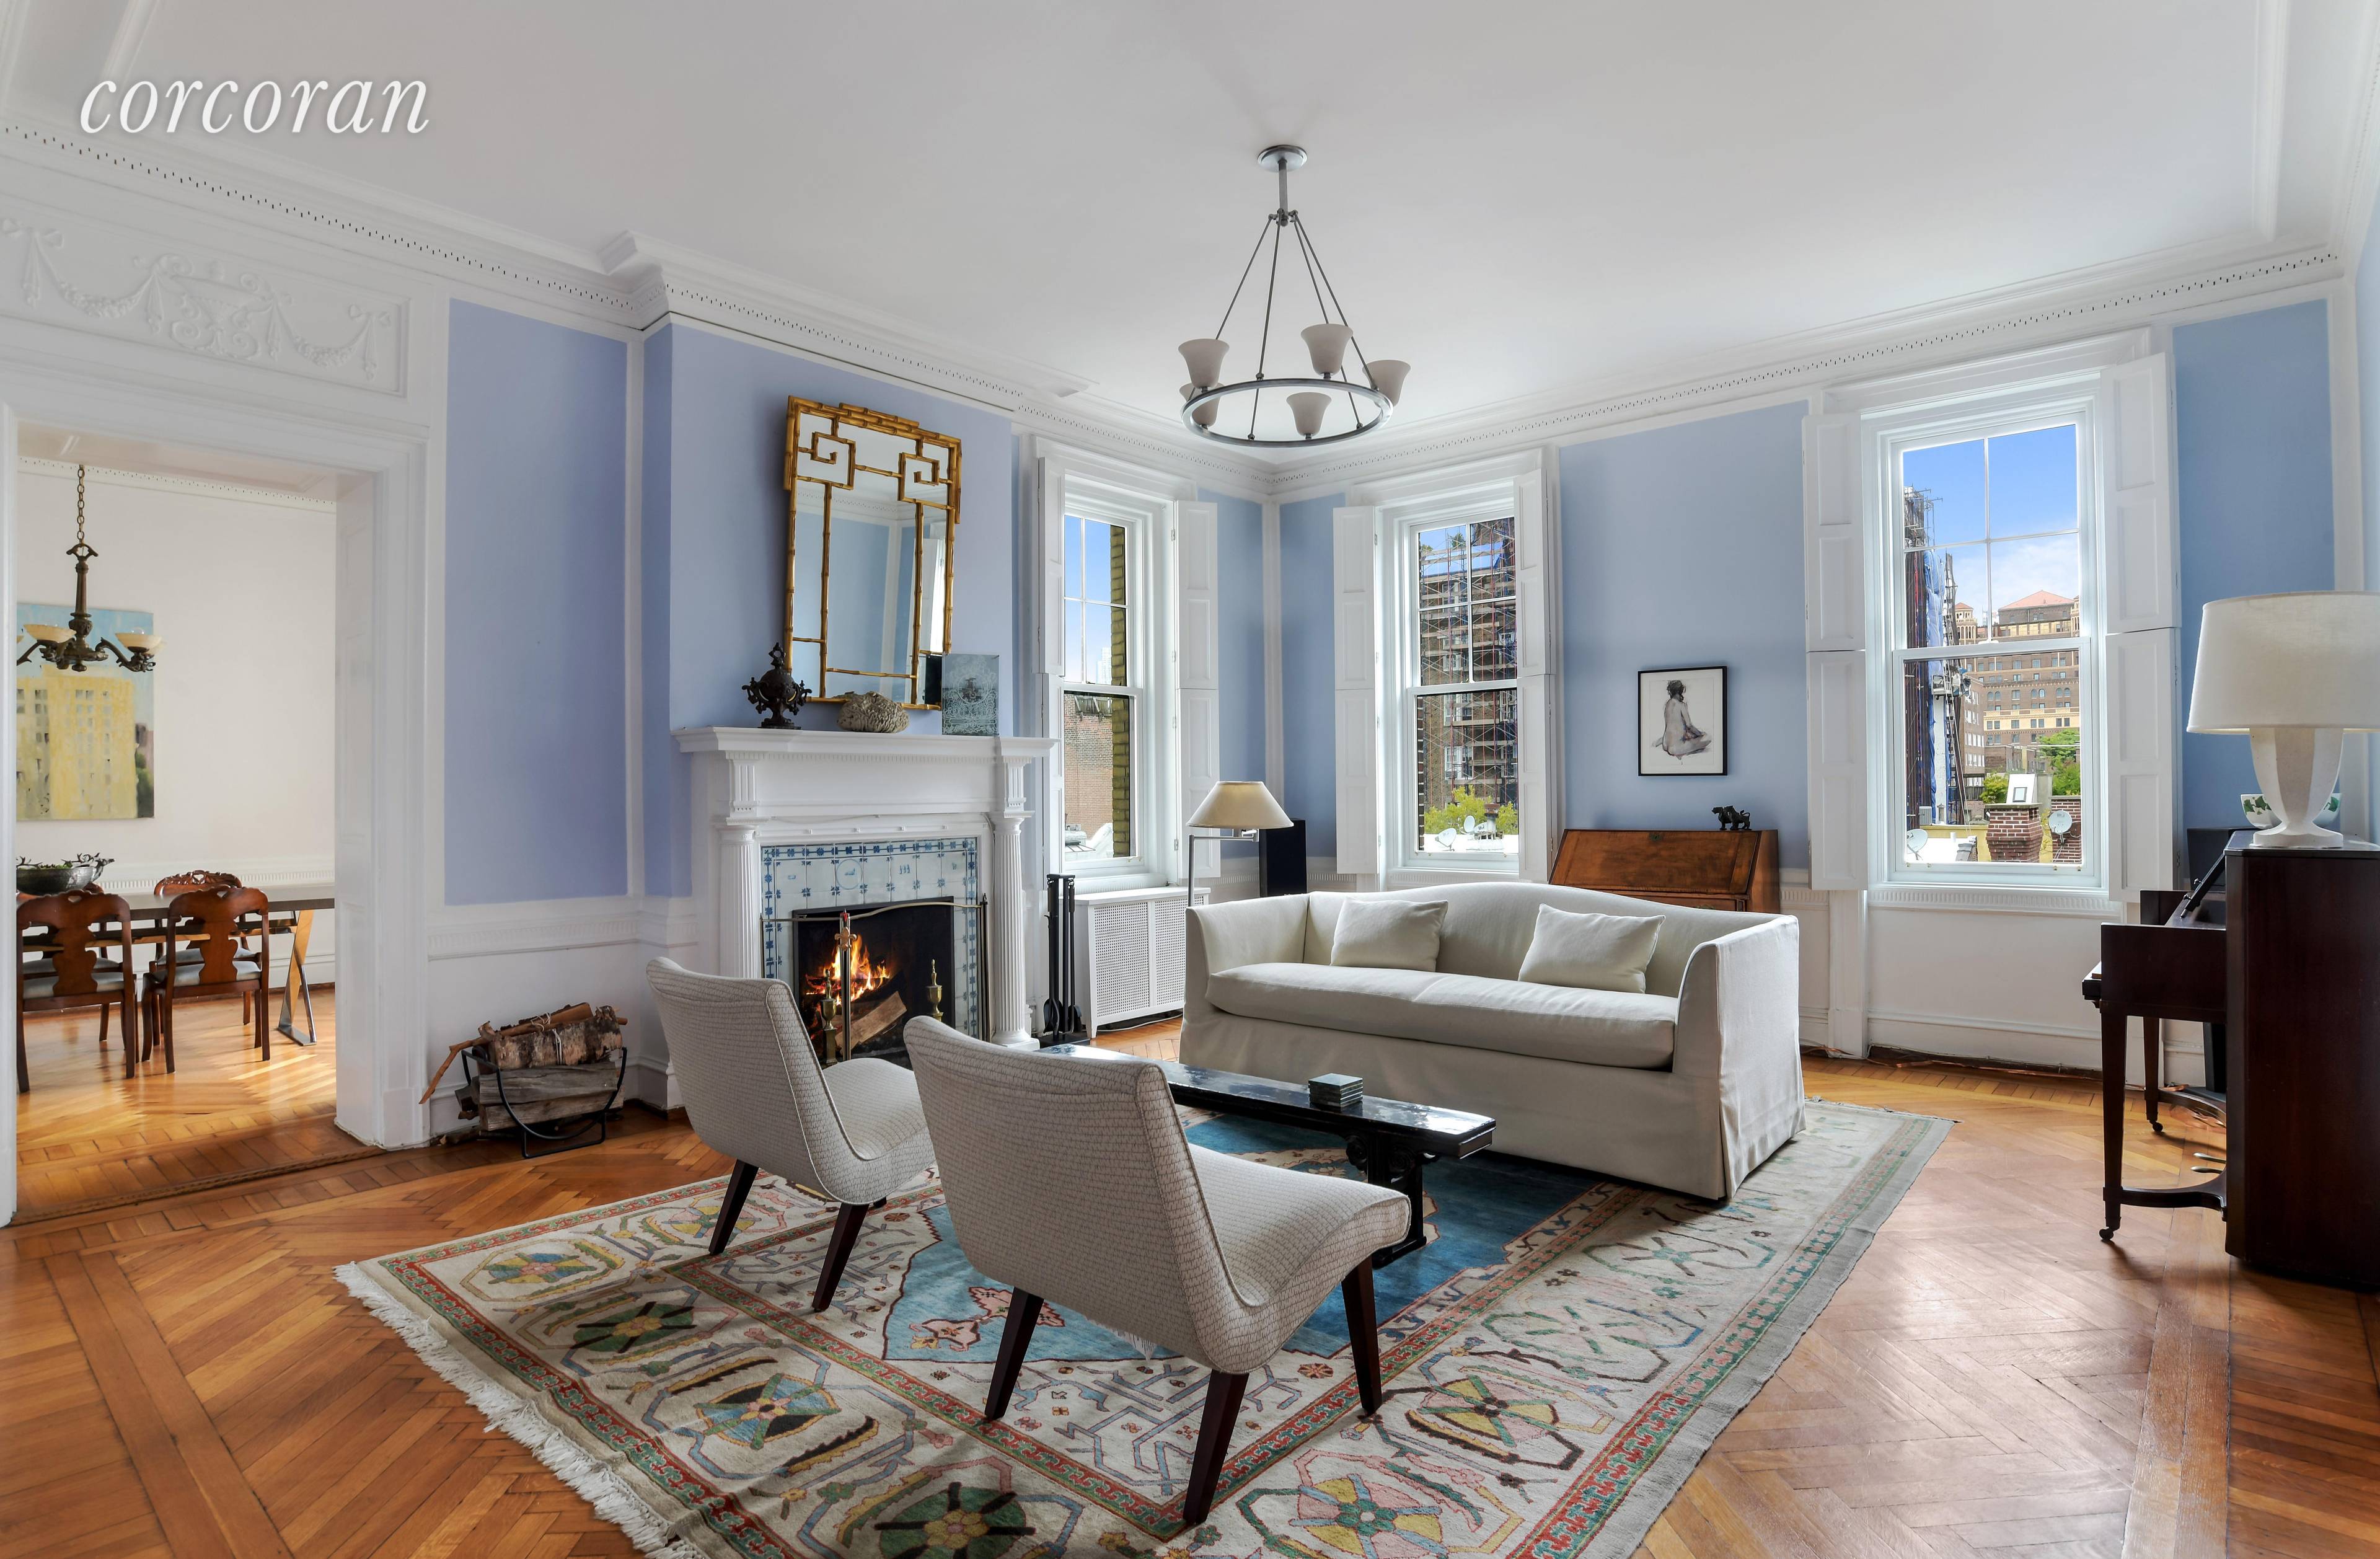 A Brooklyn Heights classic elegant two bedroom with formal dining room at 200 Hicks Street one of the neighborhood's treasured full service coops.